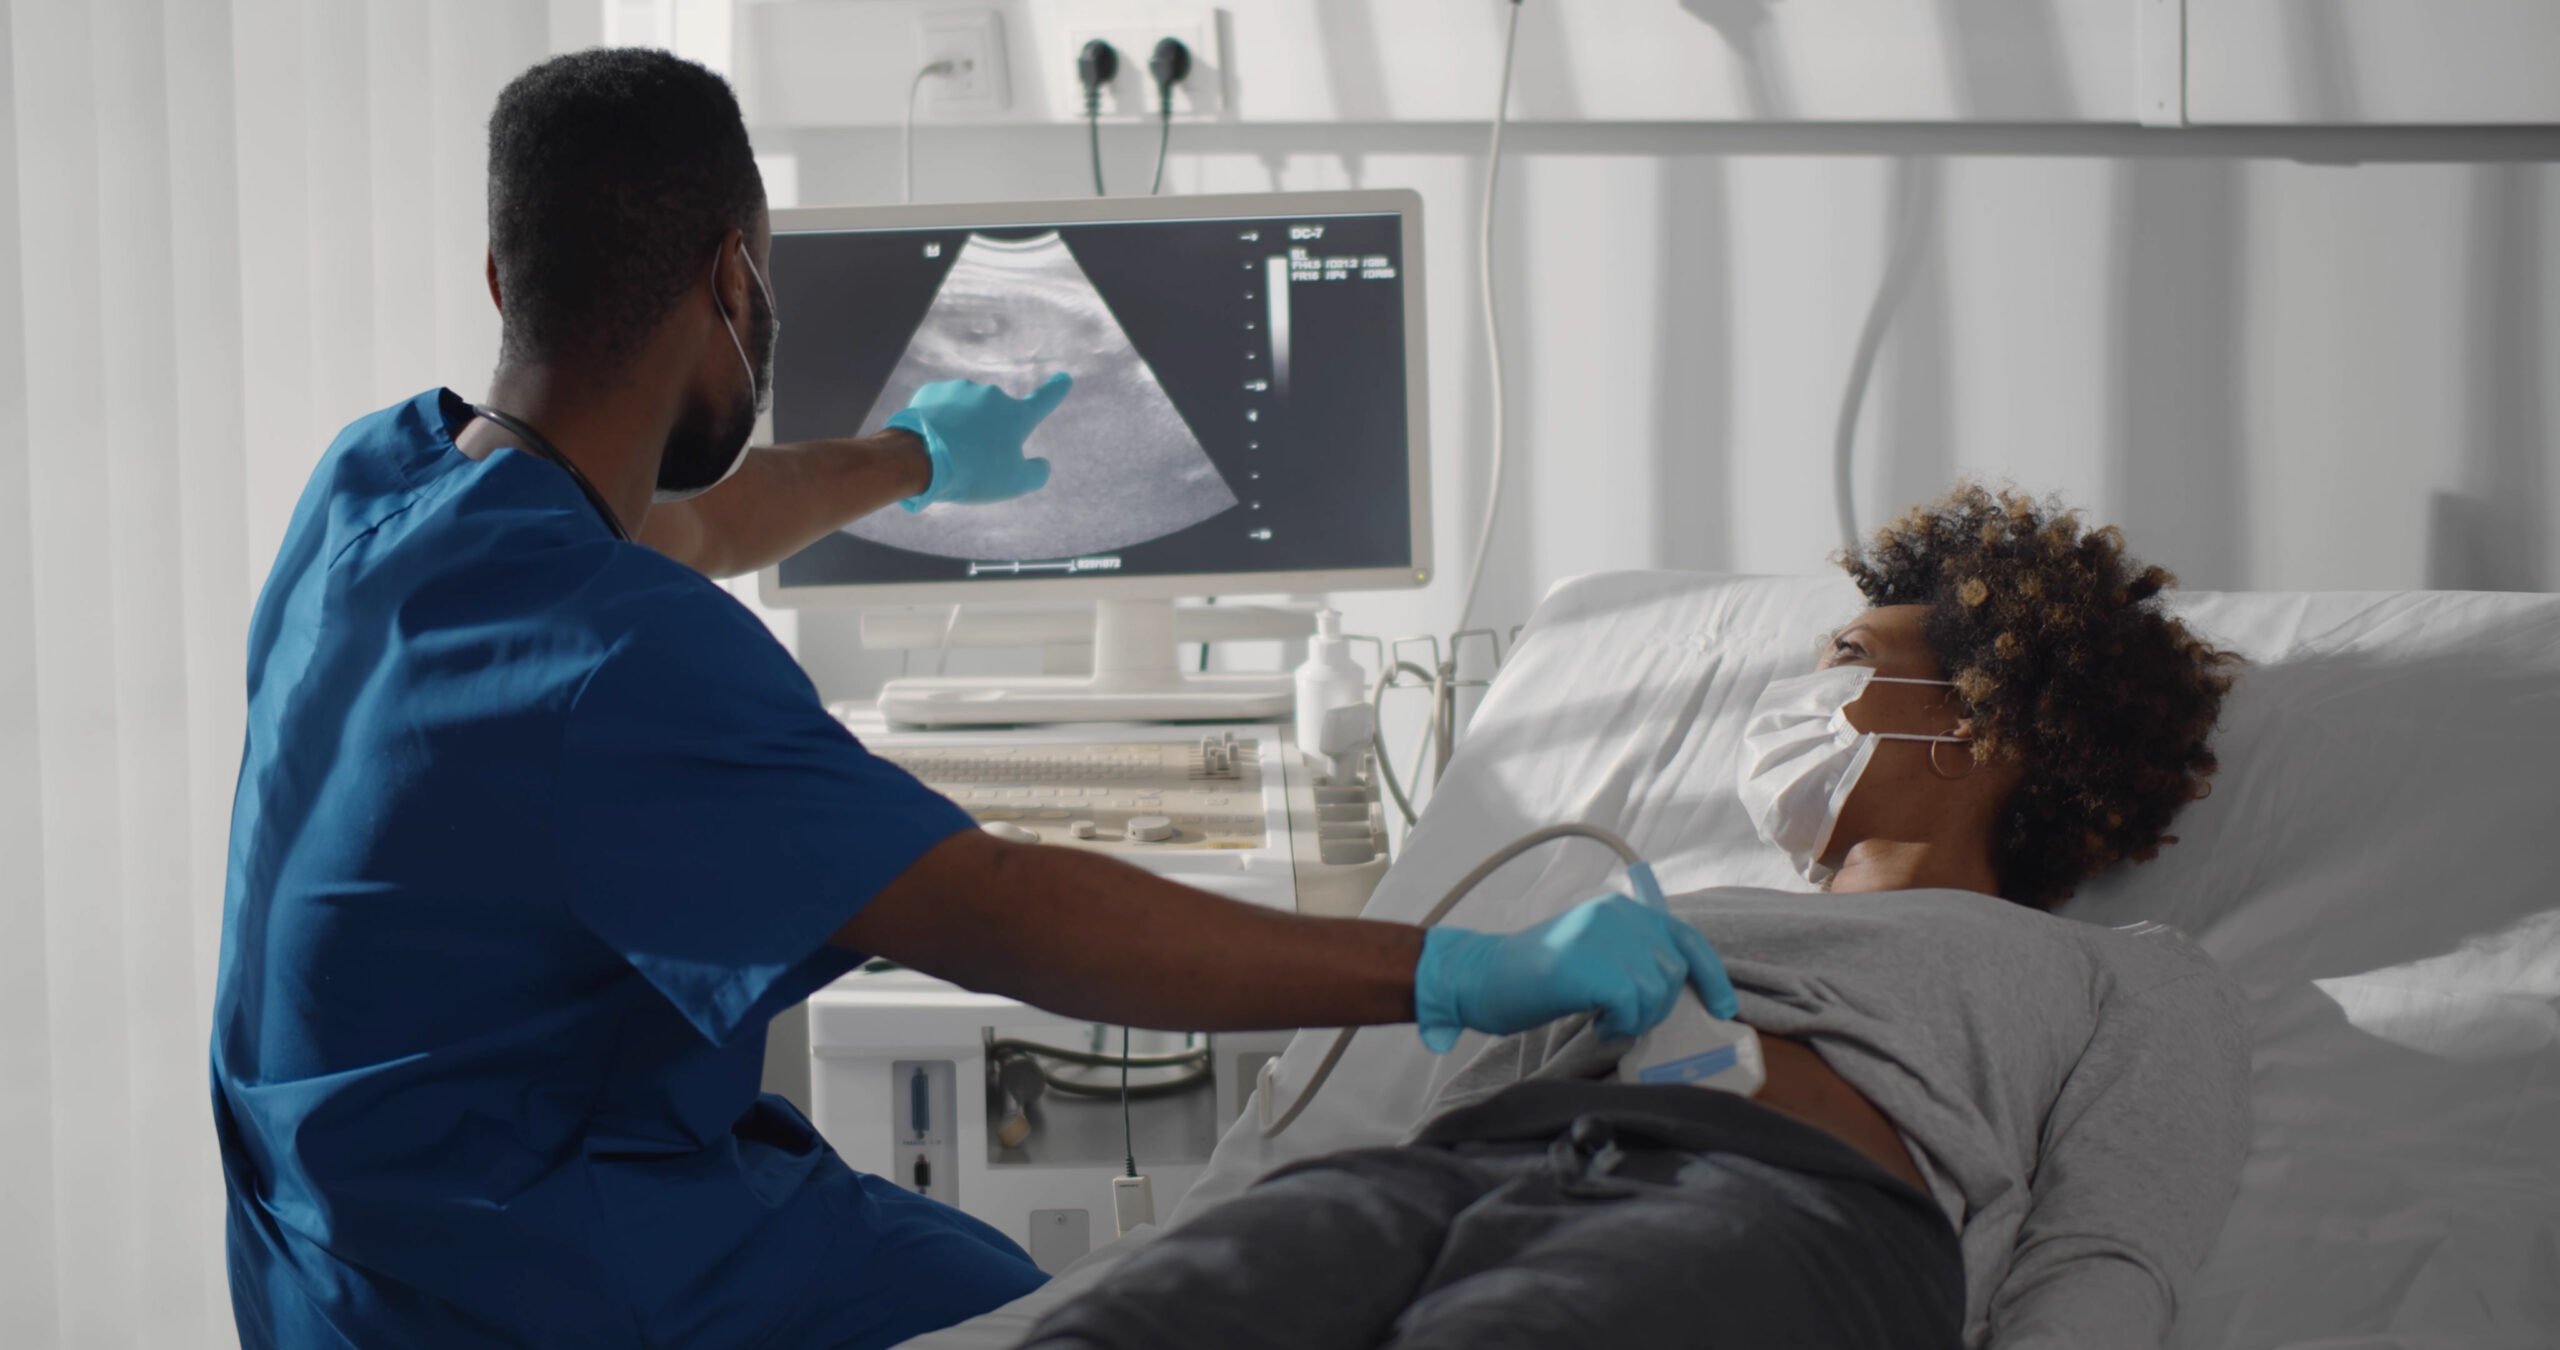 A masked Black woman laying in a hospital bed receives an ultrasound from a Black medical technician or doctor, who is pointing at the computer screen showing the infant.